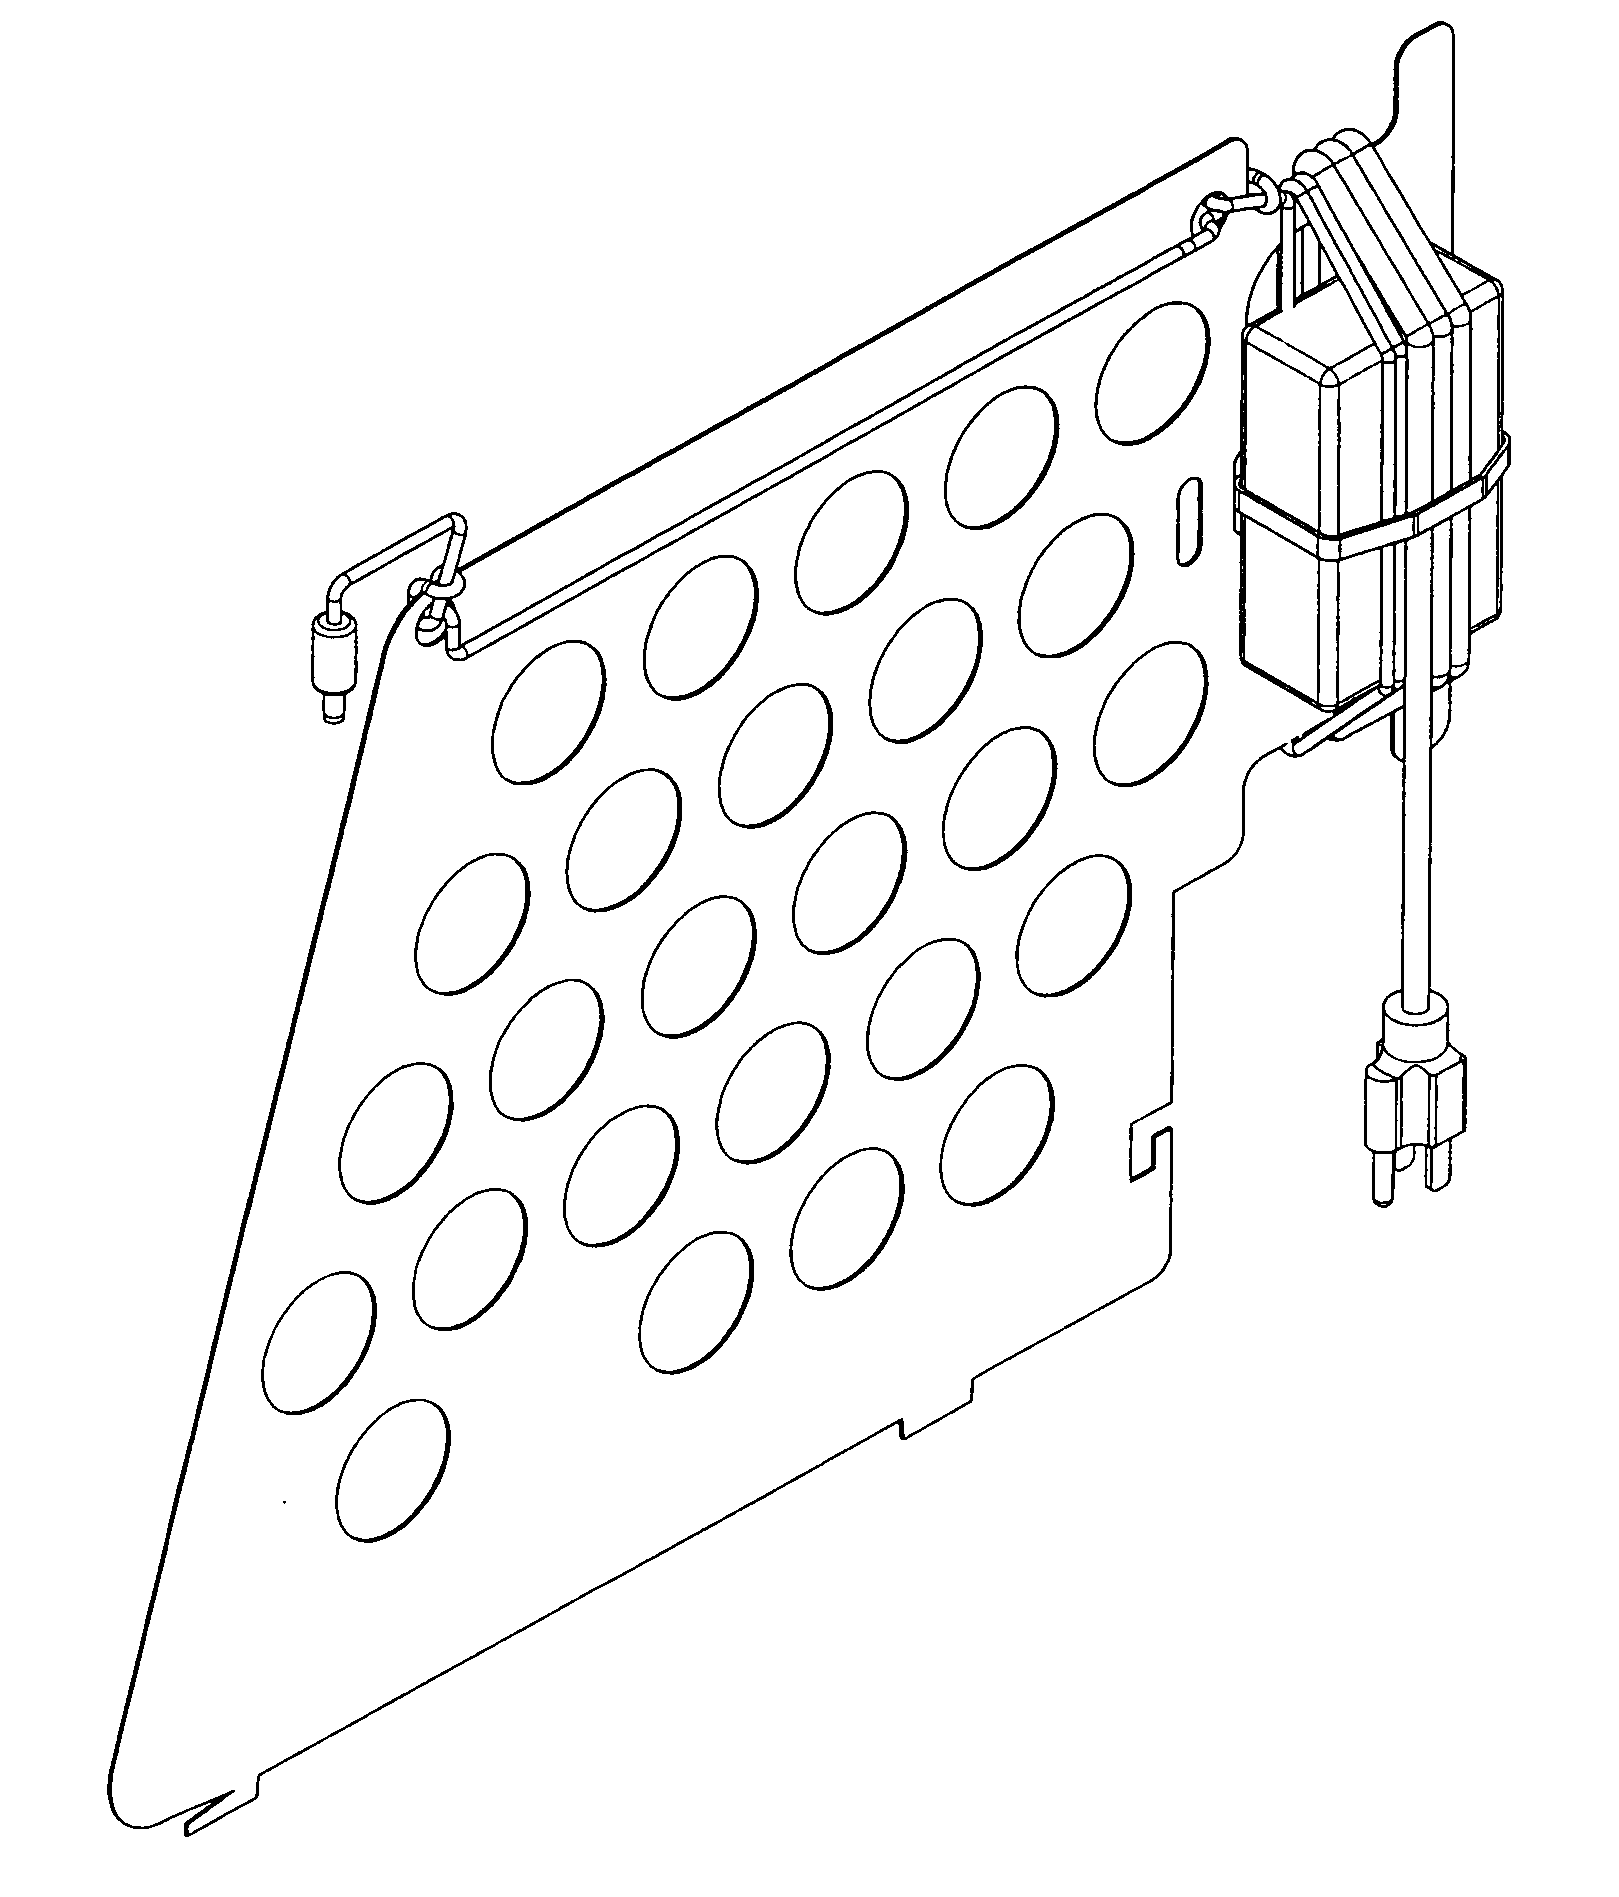 Separator with integrated storage for securing an electrical charging device and providing wire management